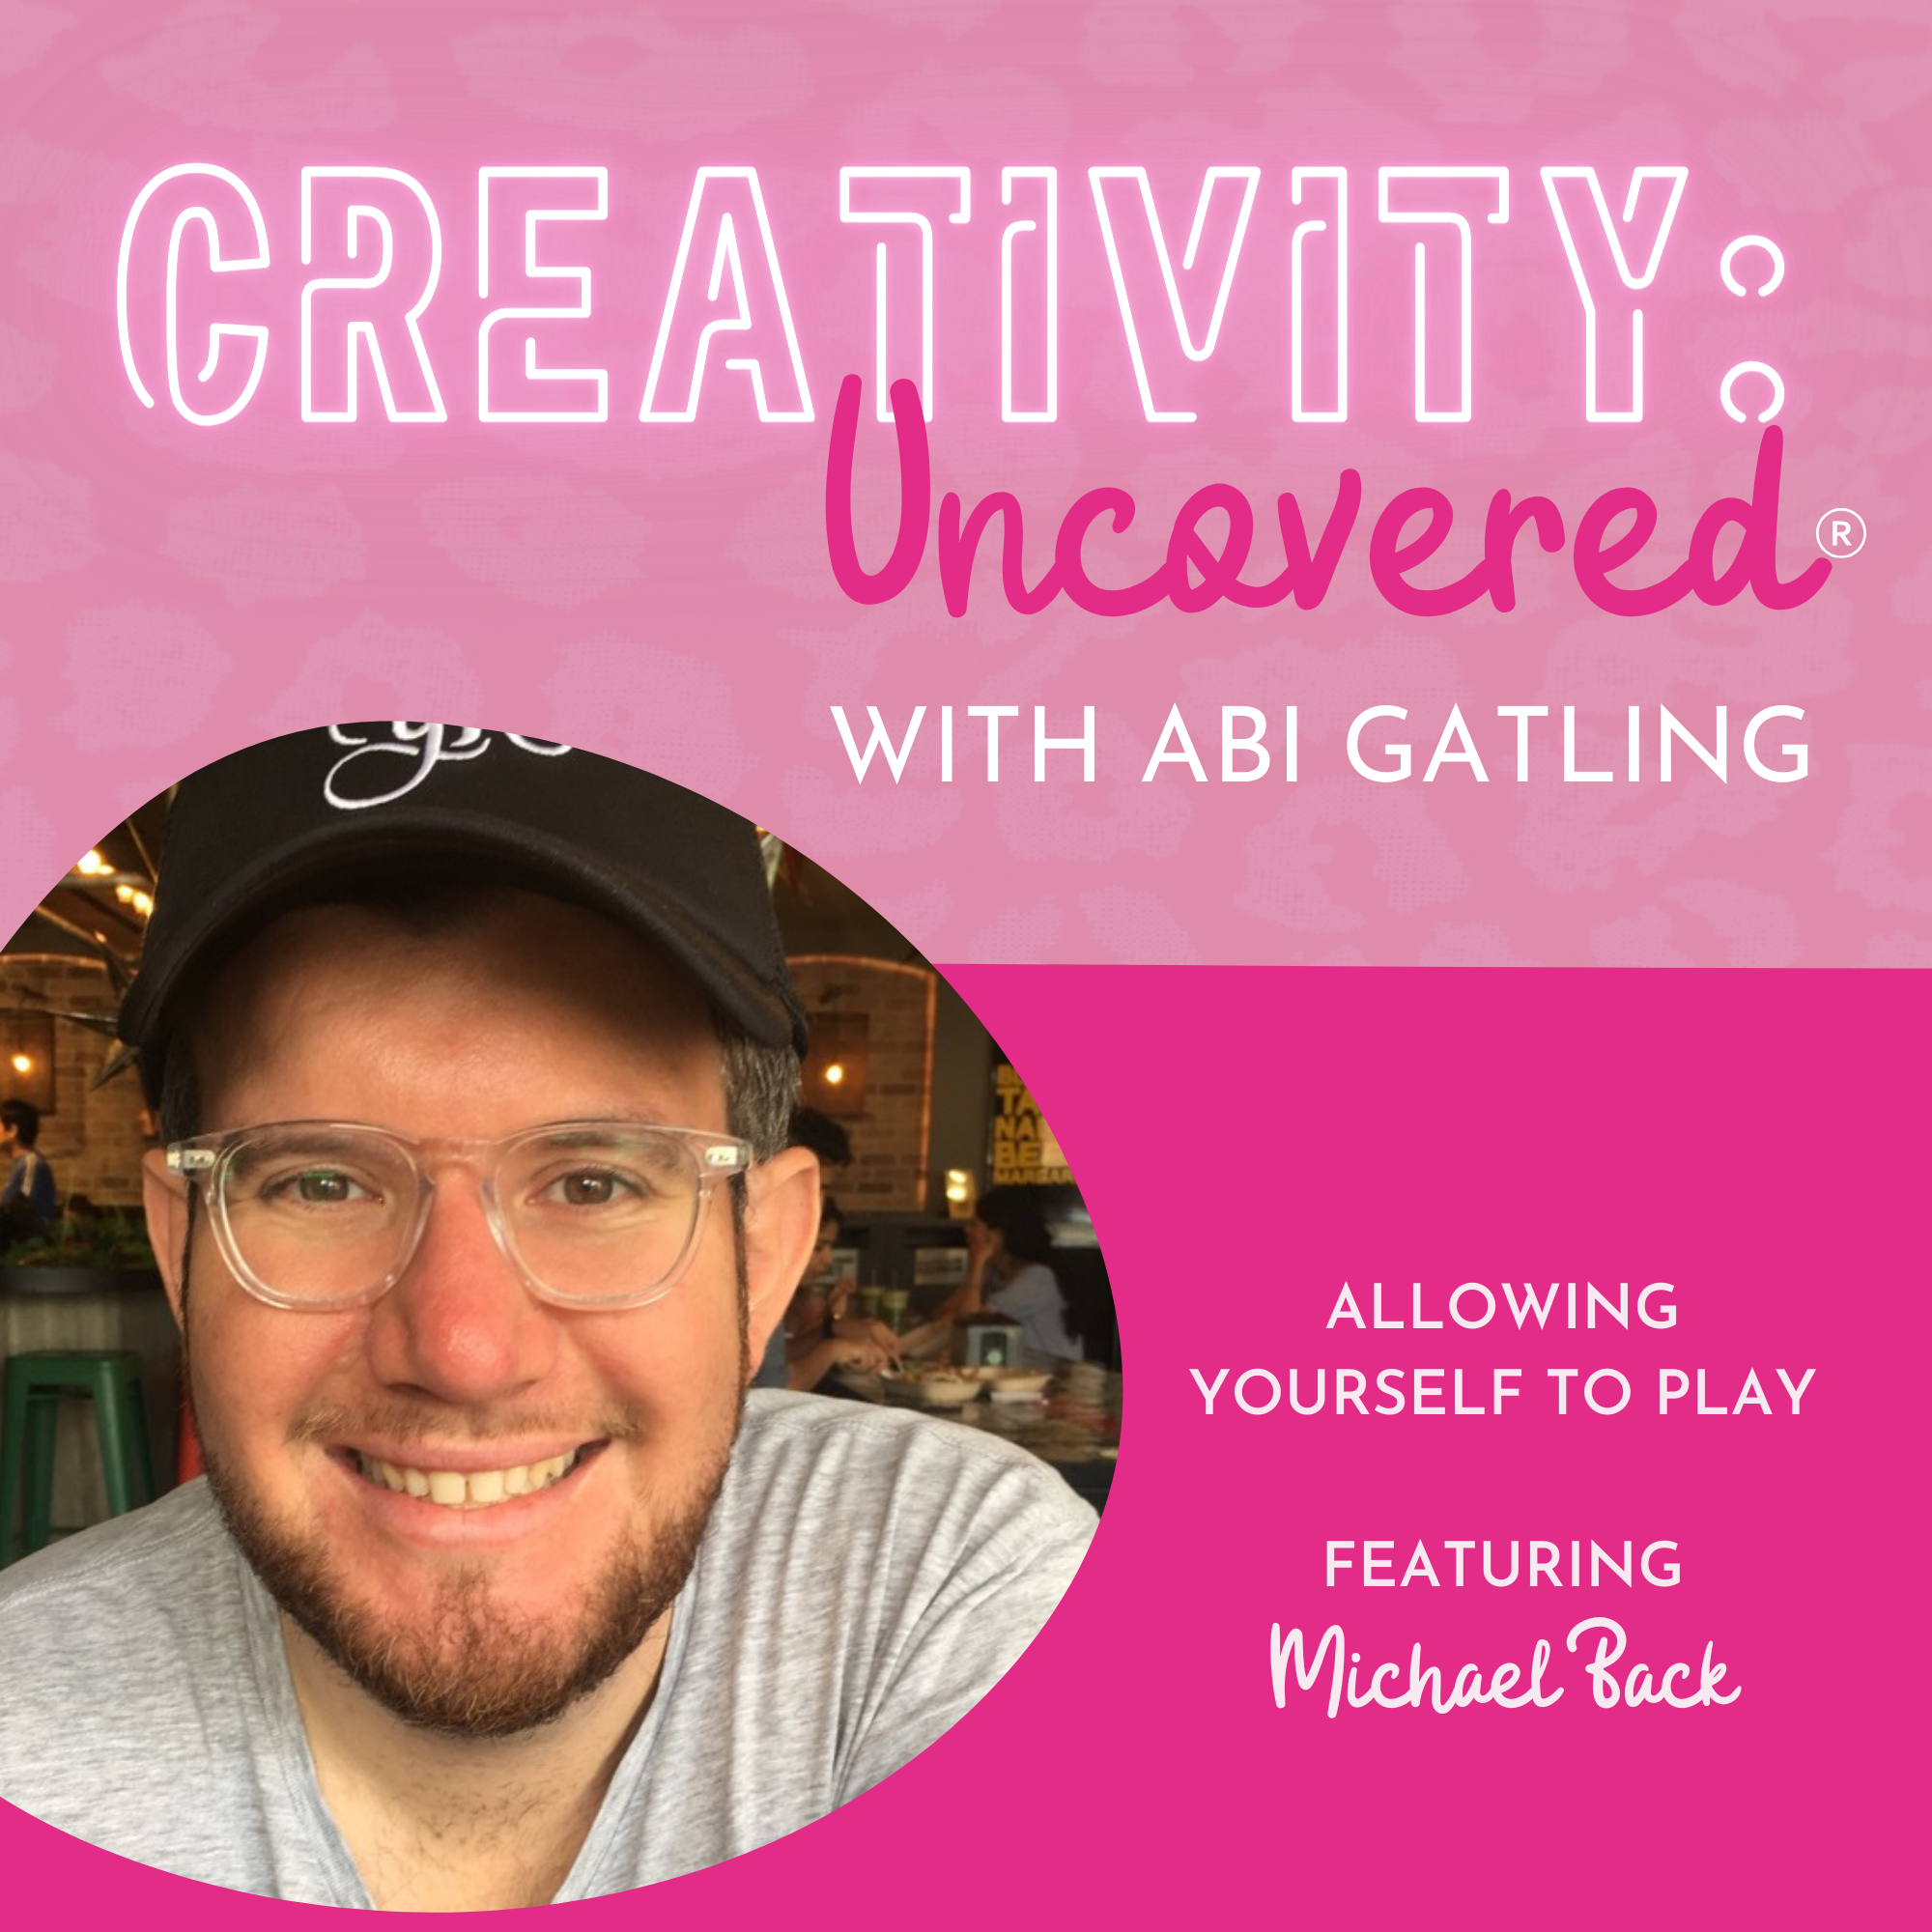 Creativity: Uncovered podcast episode graphic featuring guest Michael Back